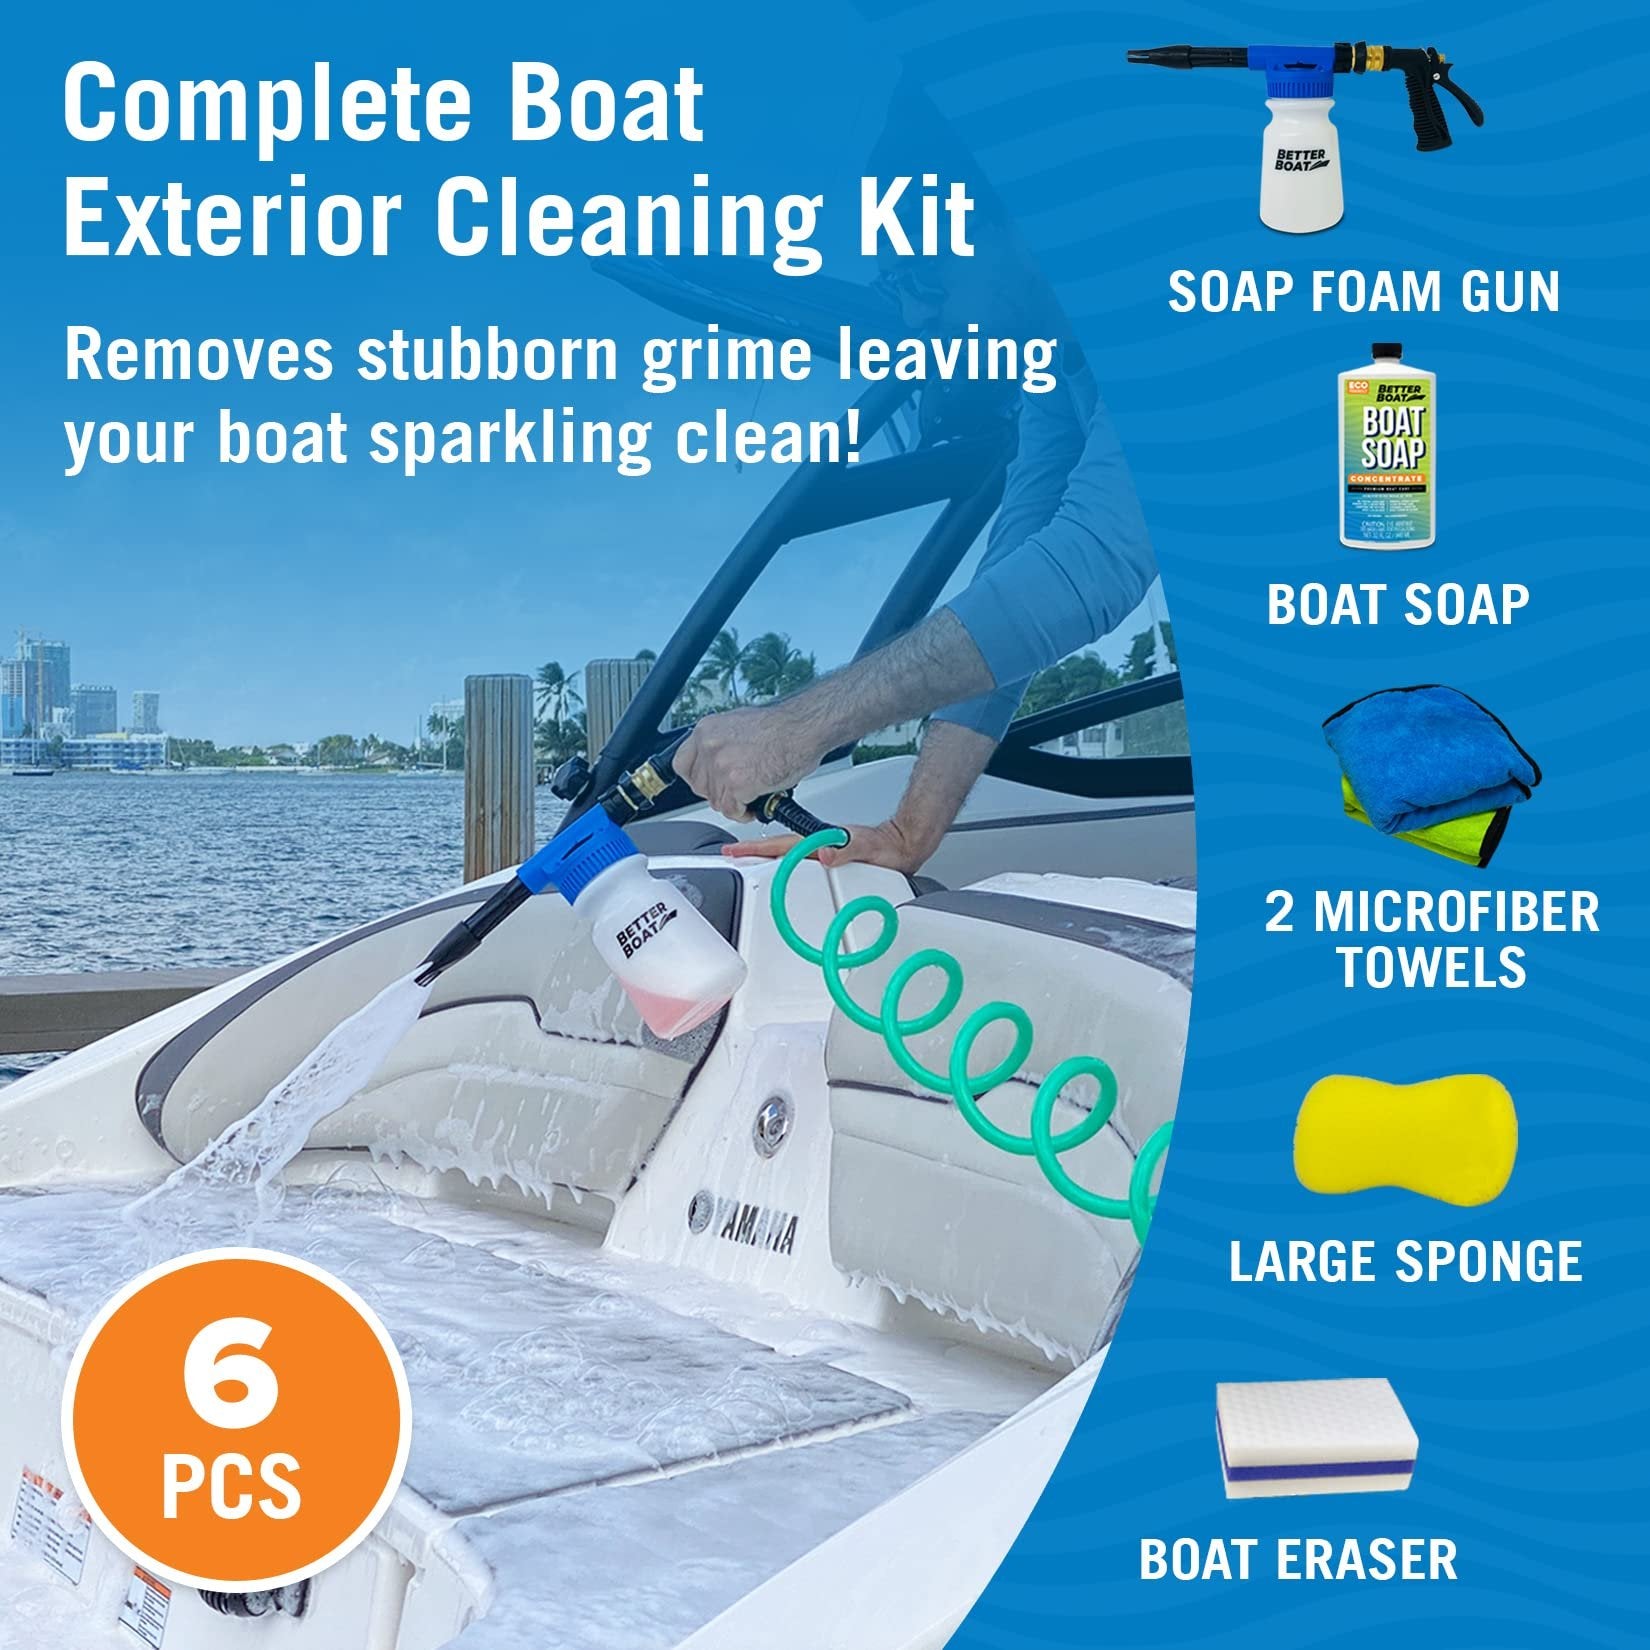 Better Boat Blue Ultimate Cleaning Kit - Boat Wash Soap, Foam Gun, Sponge, Microfiber Cloths - Size Options - Marine Accessories for Fishing, Boating, RV - Free Shipping & Returns